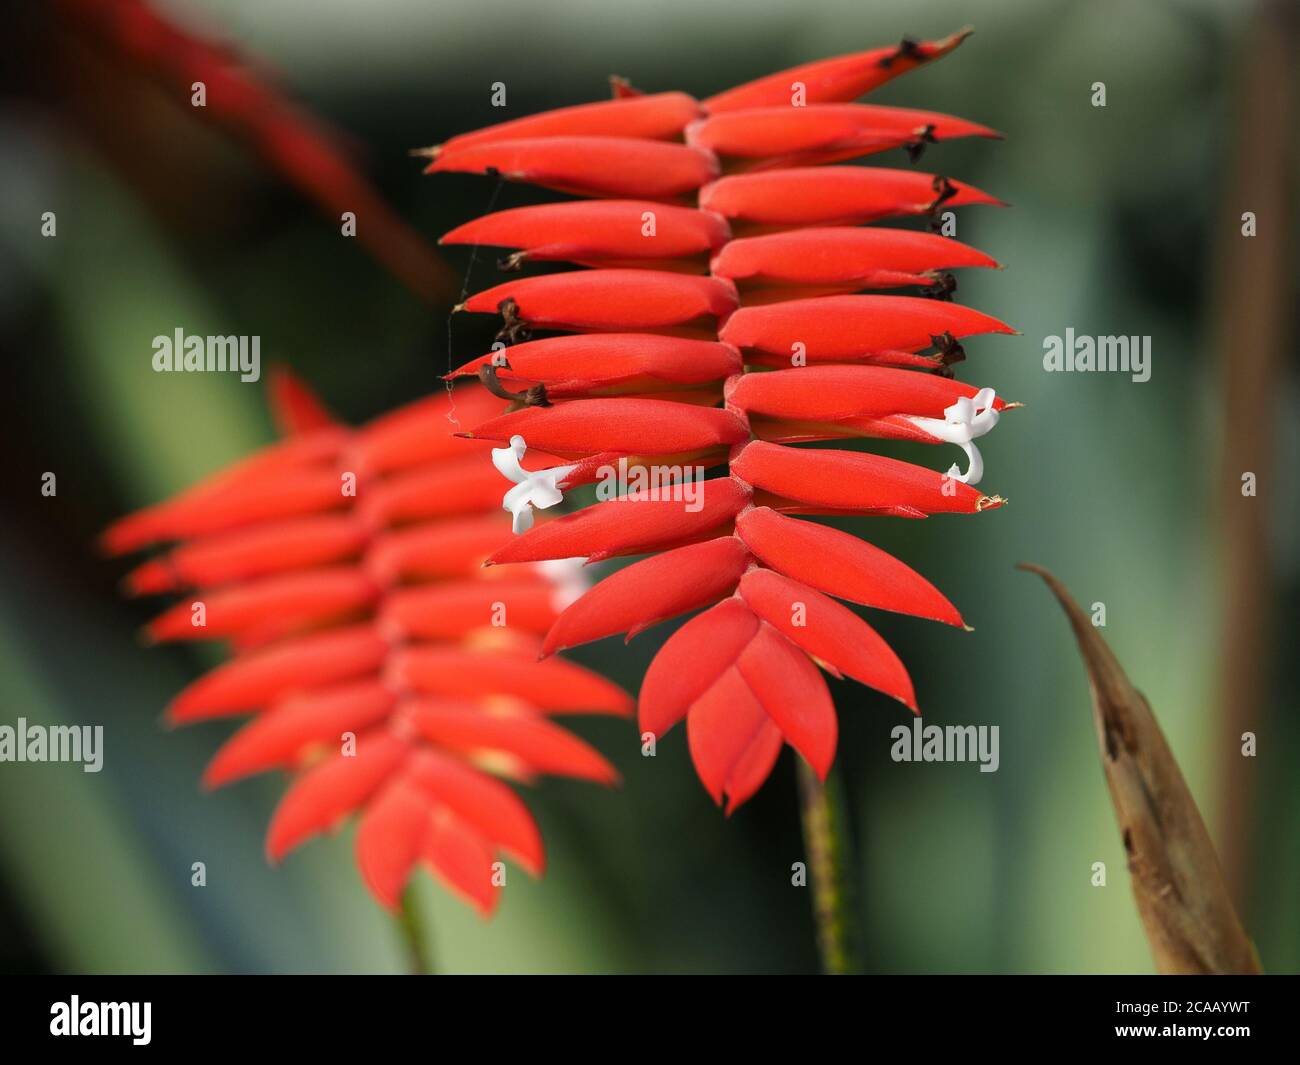 exotic heliconia plants with tiny white flowers emerging from panicles of bright scarlet red parallel pointed bracts resembling thin crab's claws Stock Photo